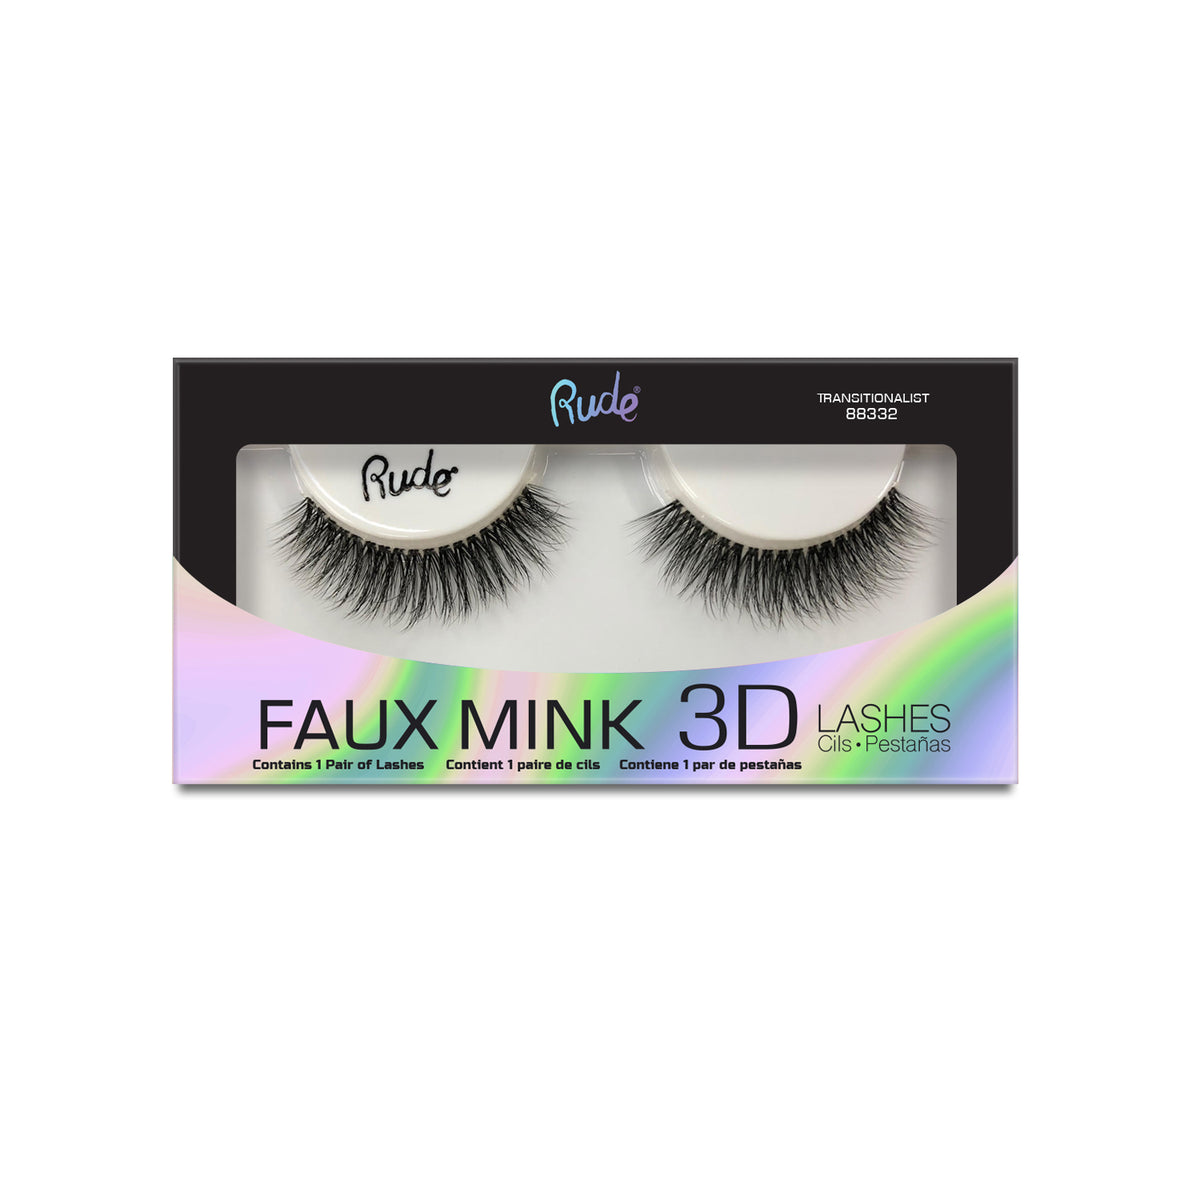 3D Lashes | Full and Fluffy Faux Mink Lashes Transitionalist